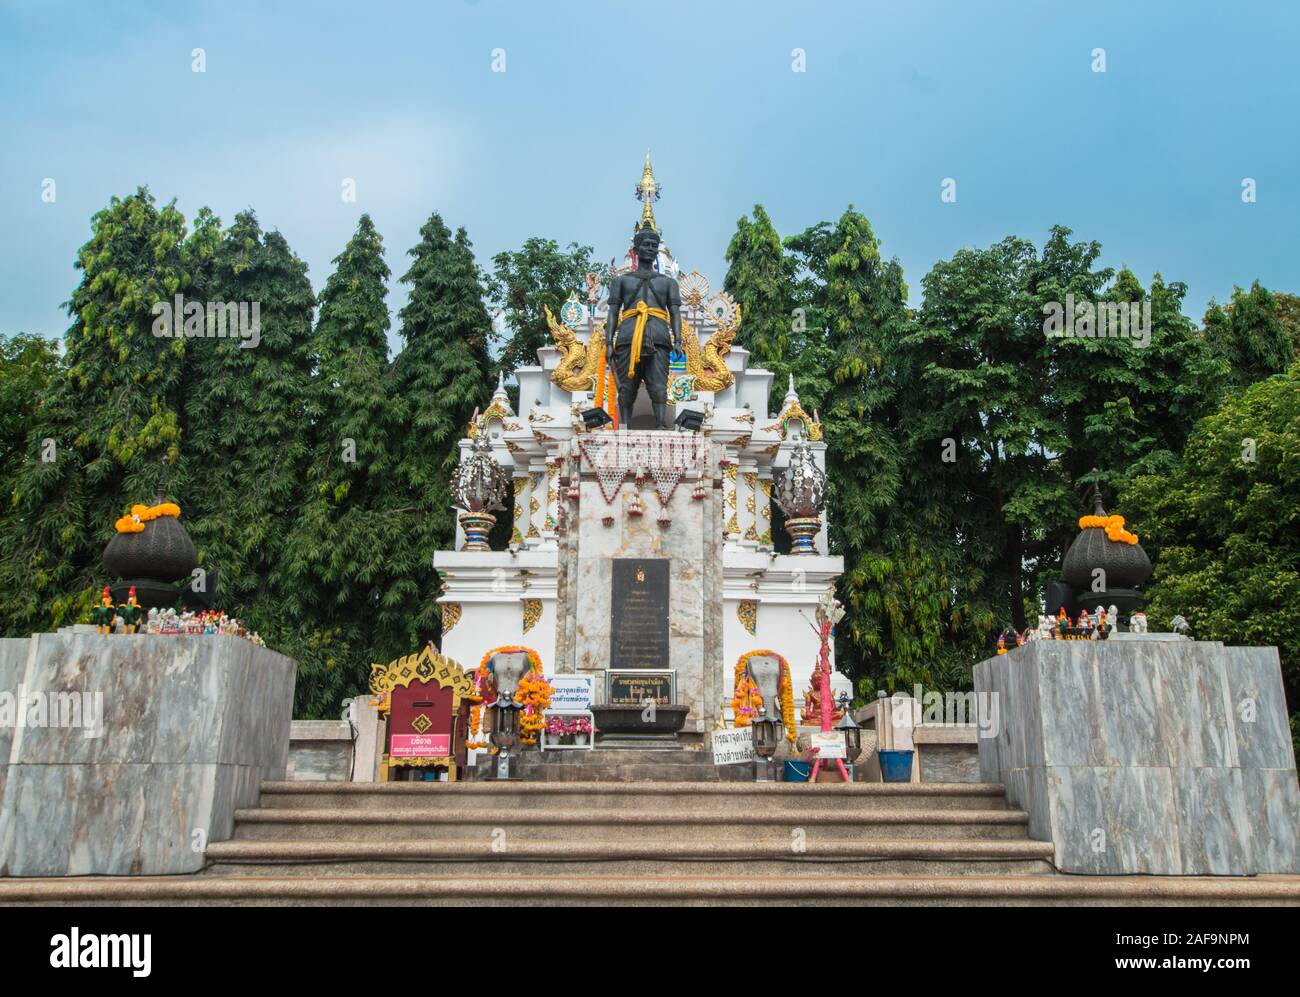 Phayao, Thailand - October 13, 2019: The Pho Khun Ngam Mueang Monument is located in the public park near Kwan Phayao lake. Stock Photo